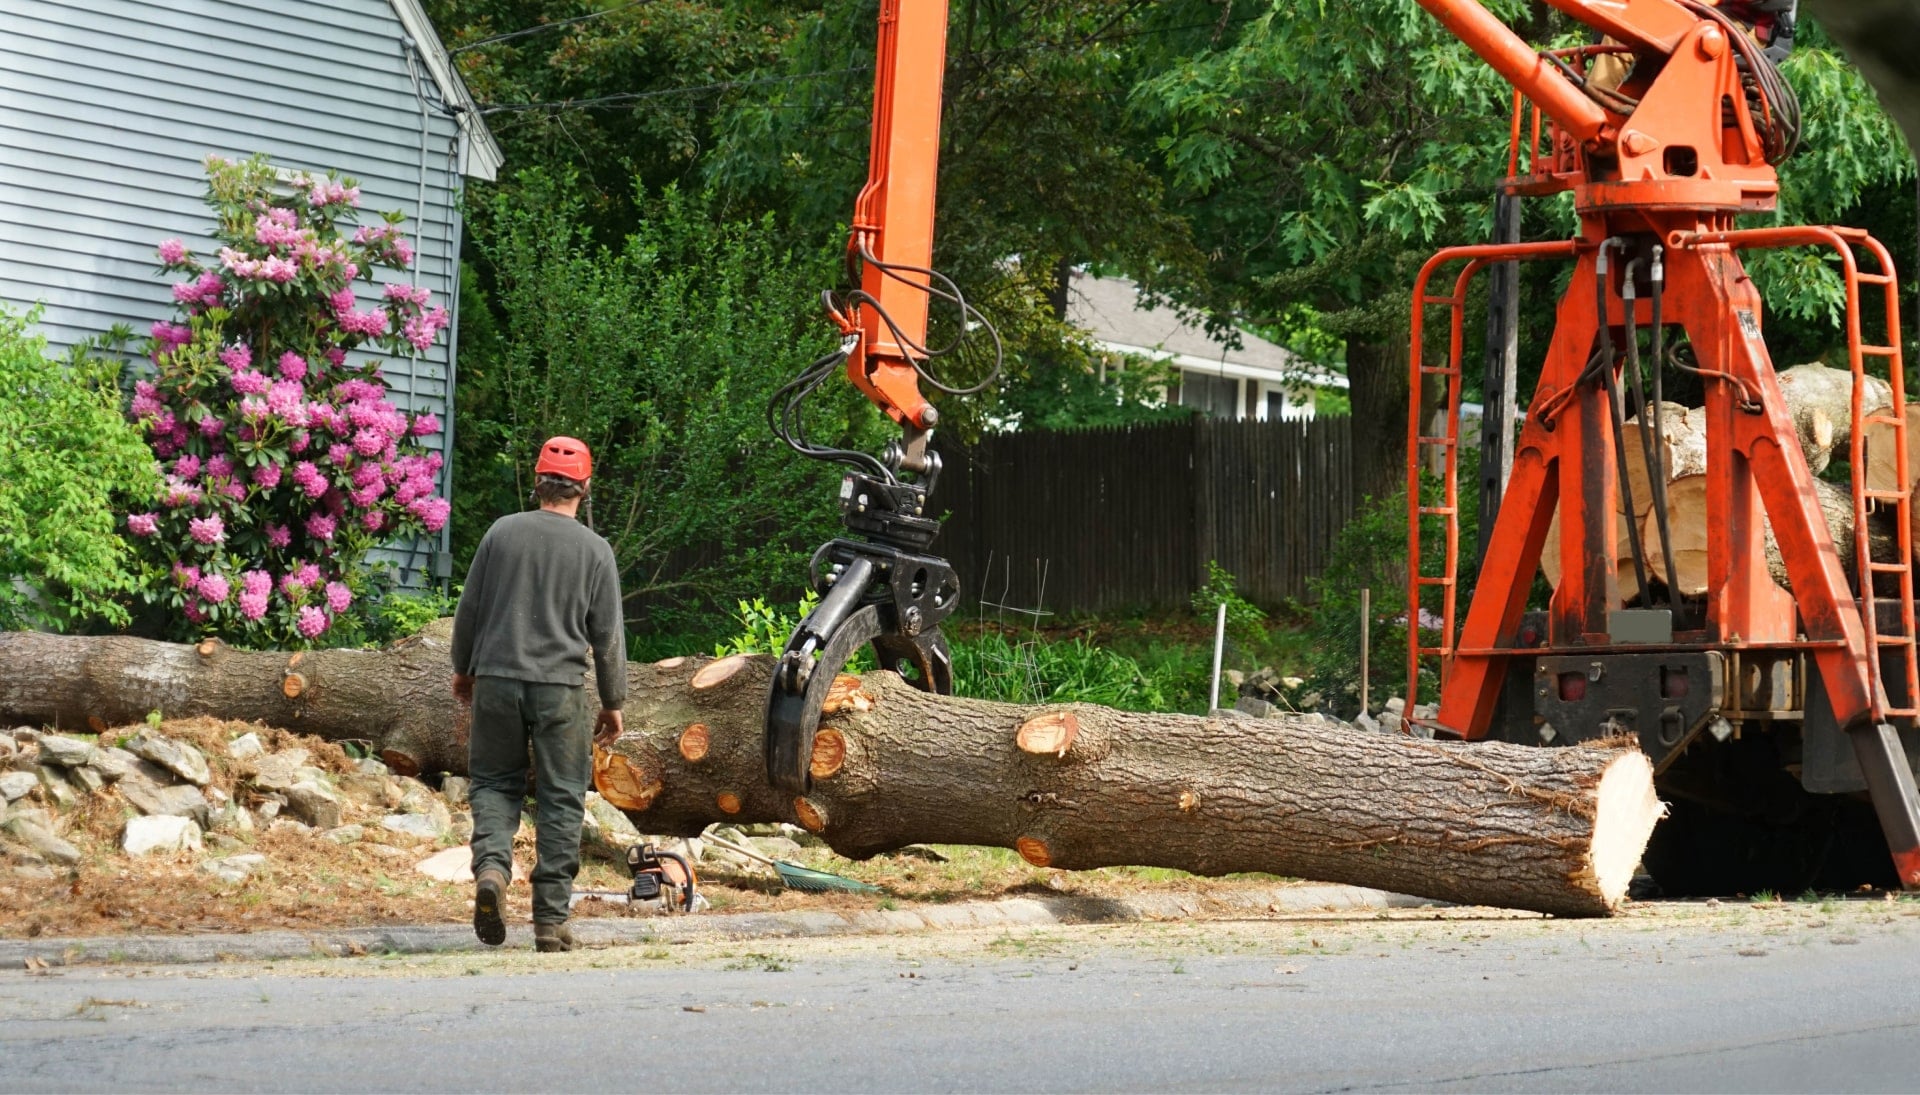 Local partner for Tree removal services in Flagstaff